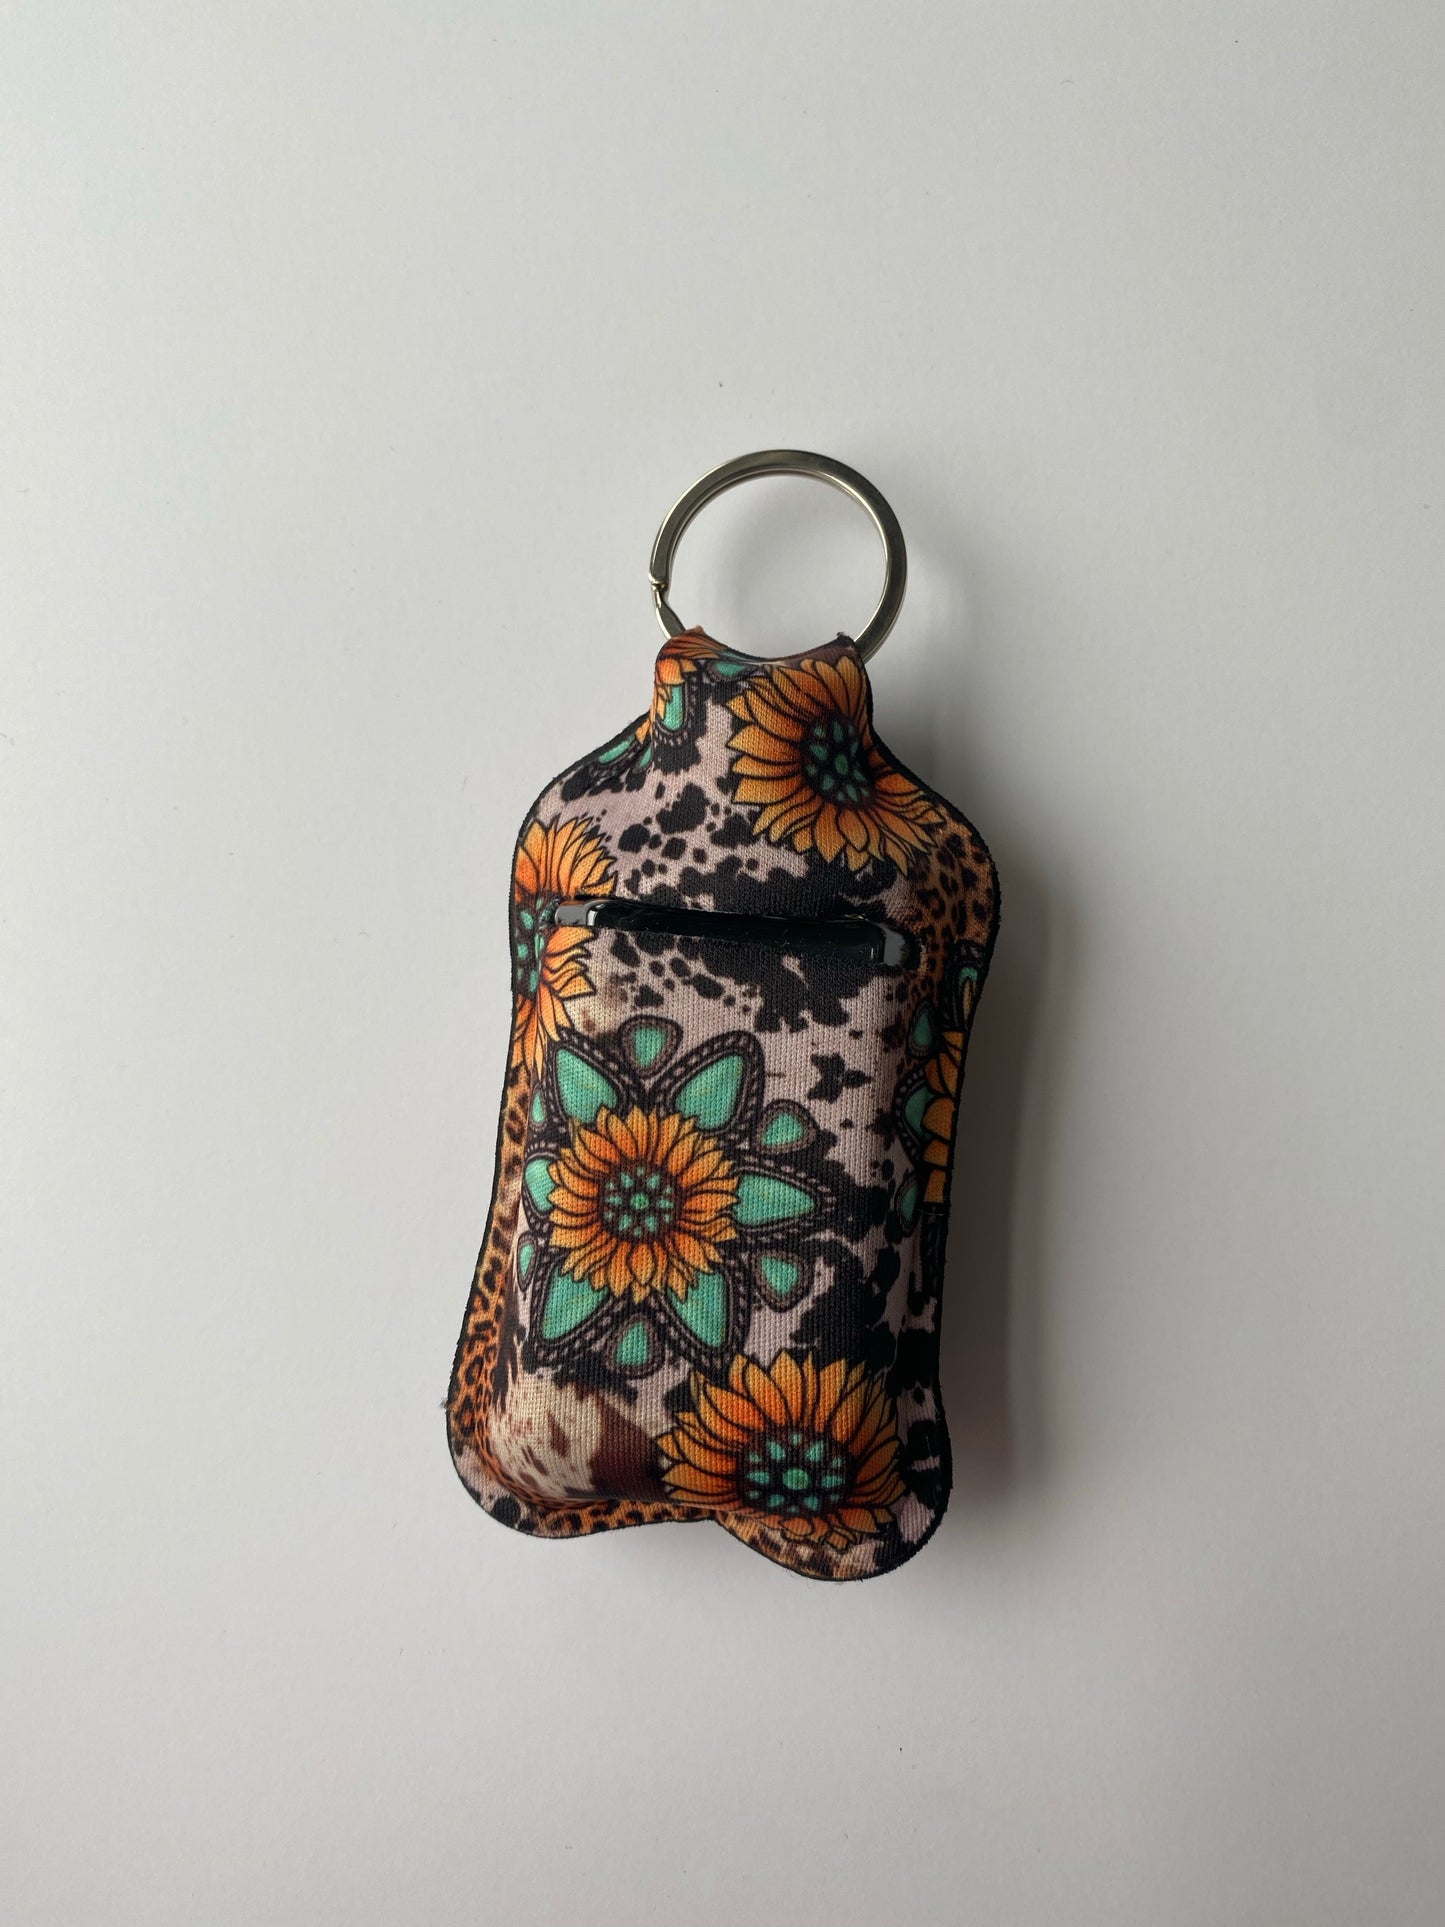 Turquoise Dreams Hand Sanitizer Keychain